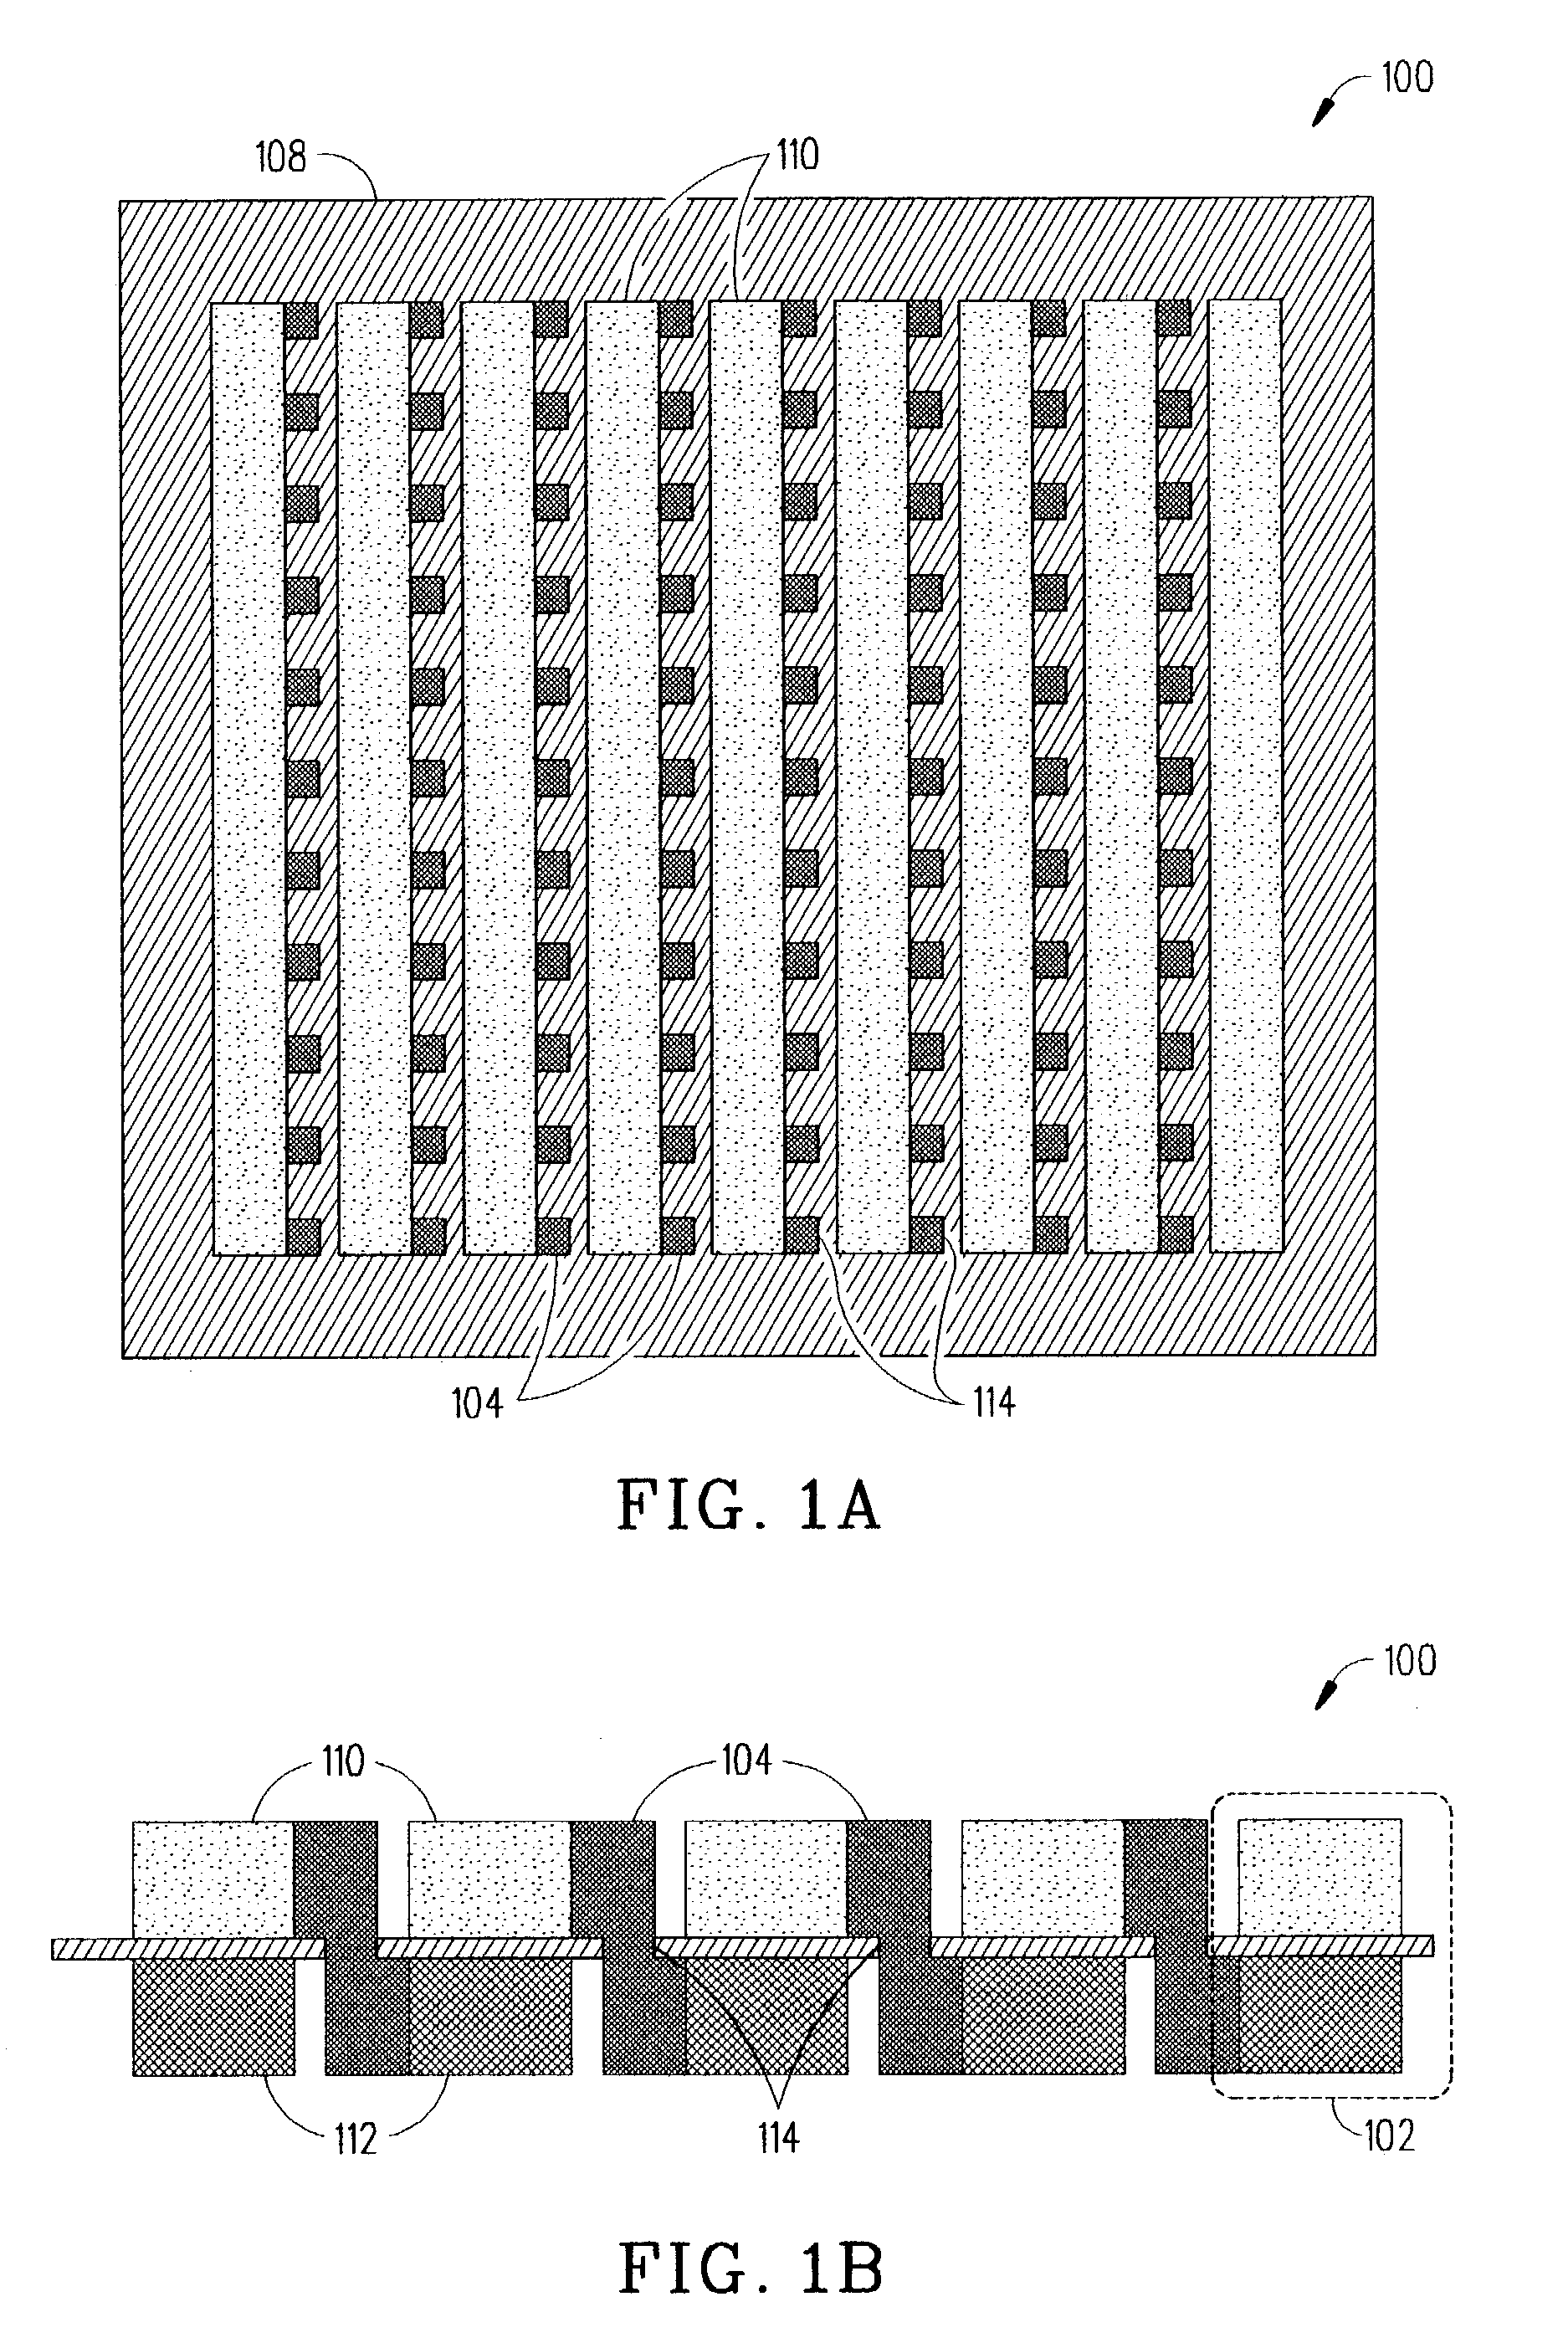 Fuel cells with enhanced via fill compositions and/or enhanced via fill geometries